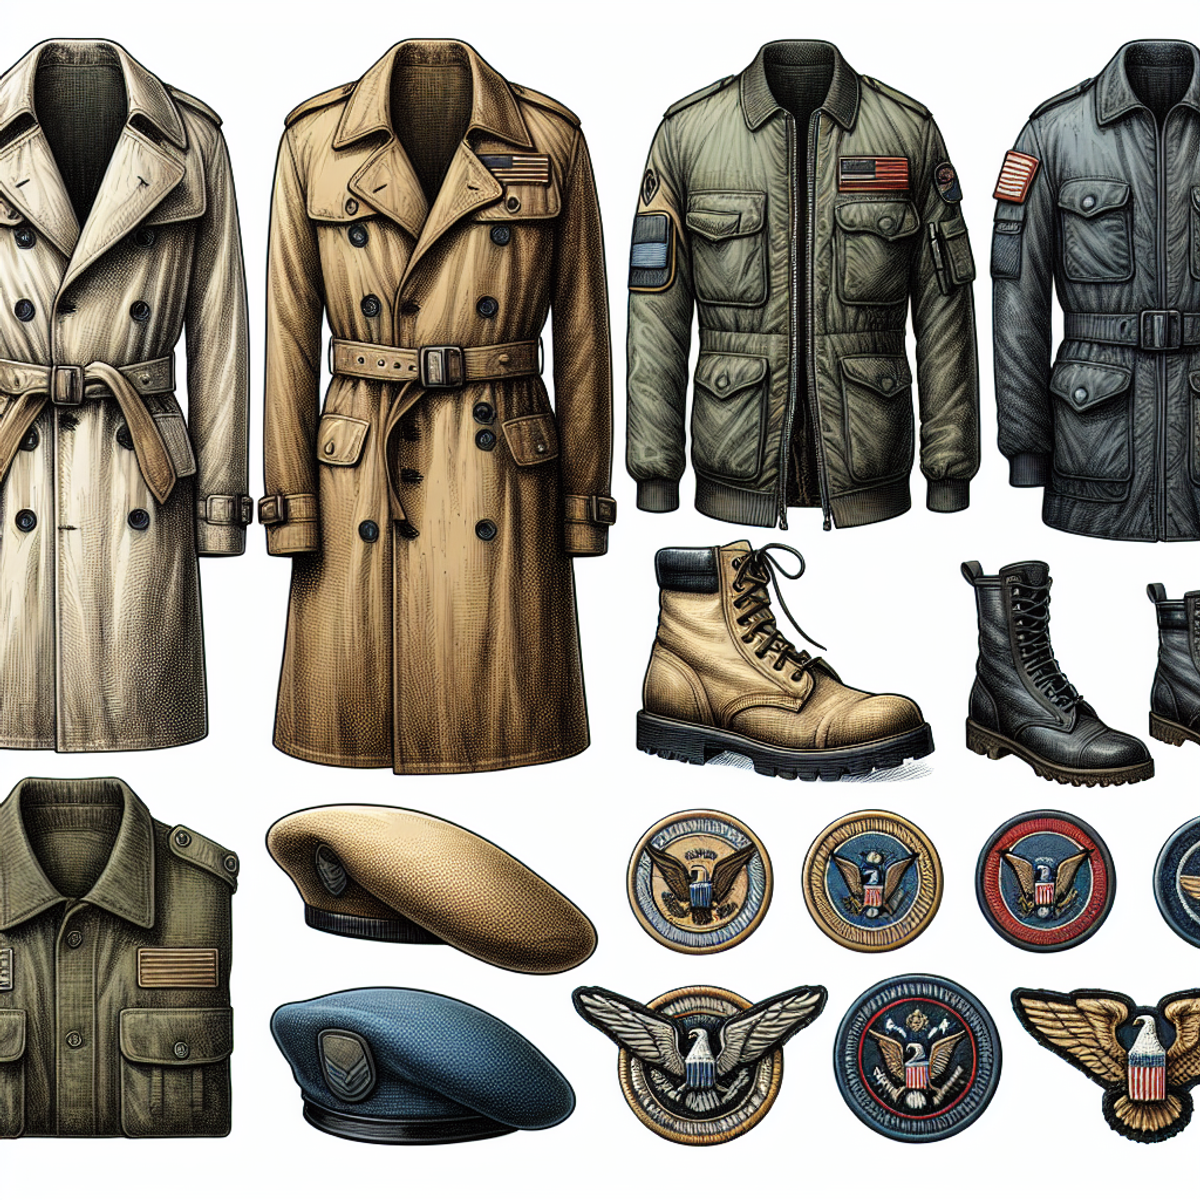 A collage of military fashion essentials including trench coats, flight jackets, combat boots, berets, and insignia patches.